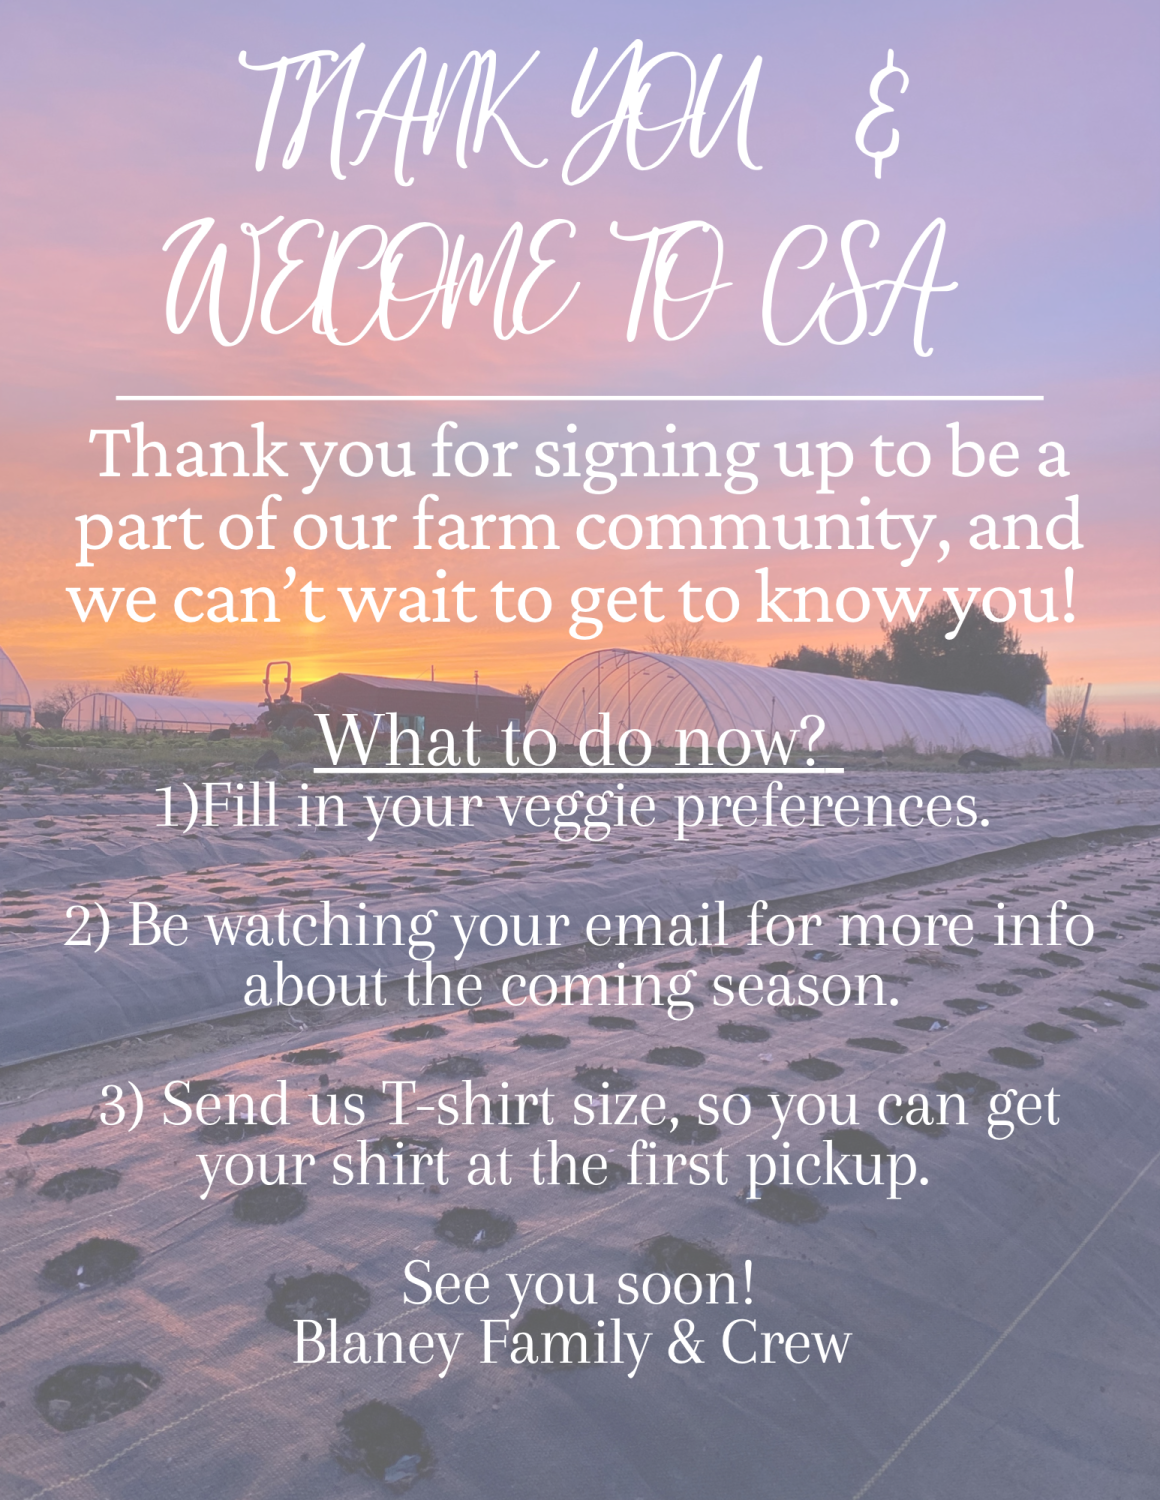 Previous Happening: Welcome to CSA 2023!!!